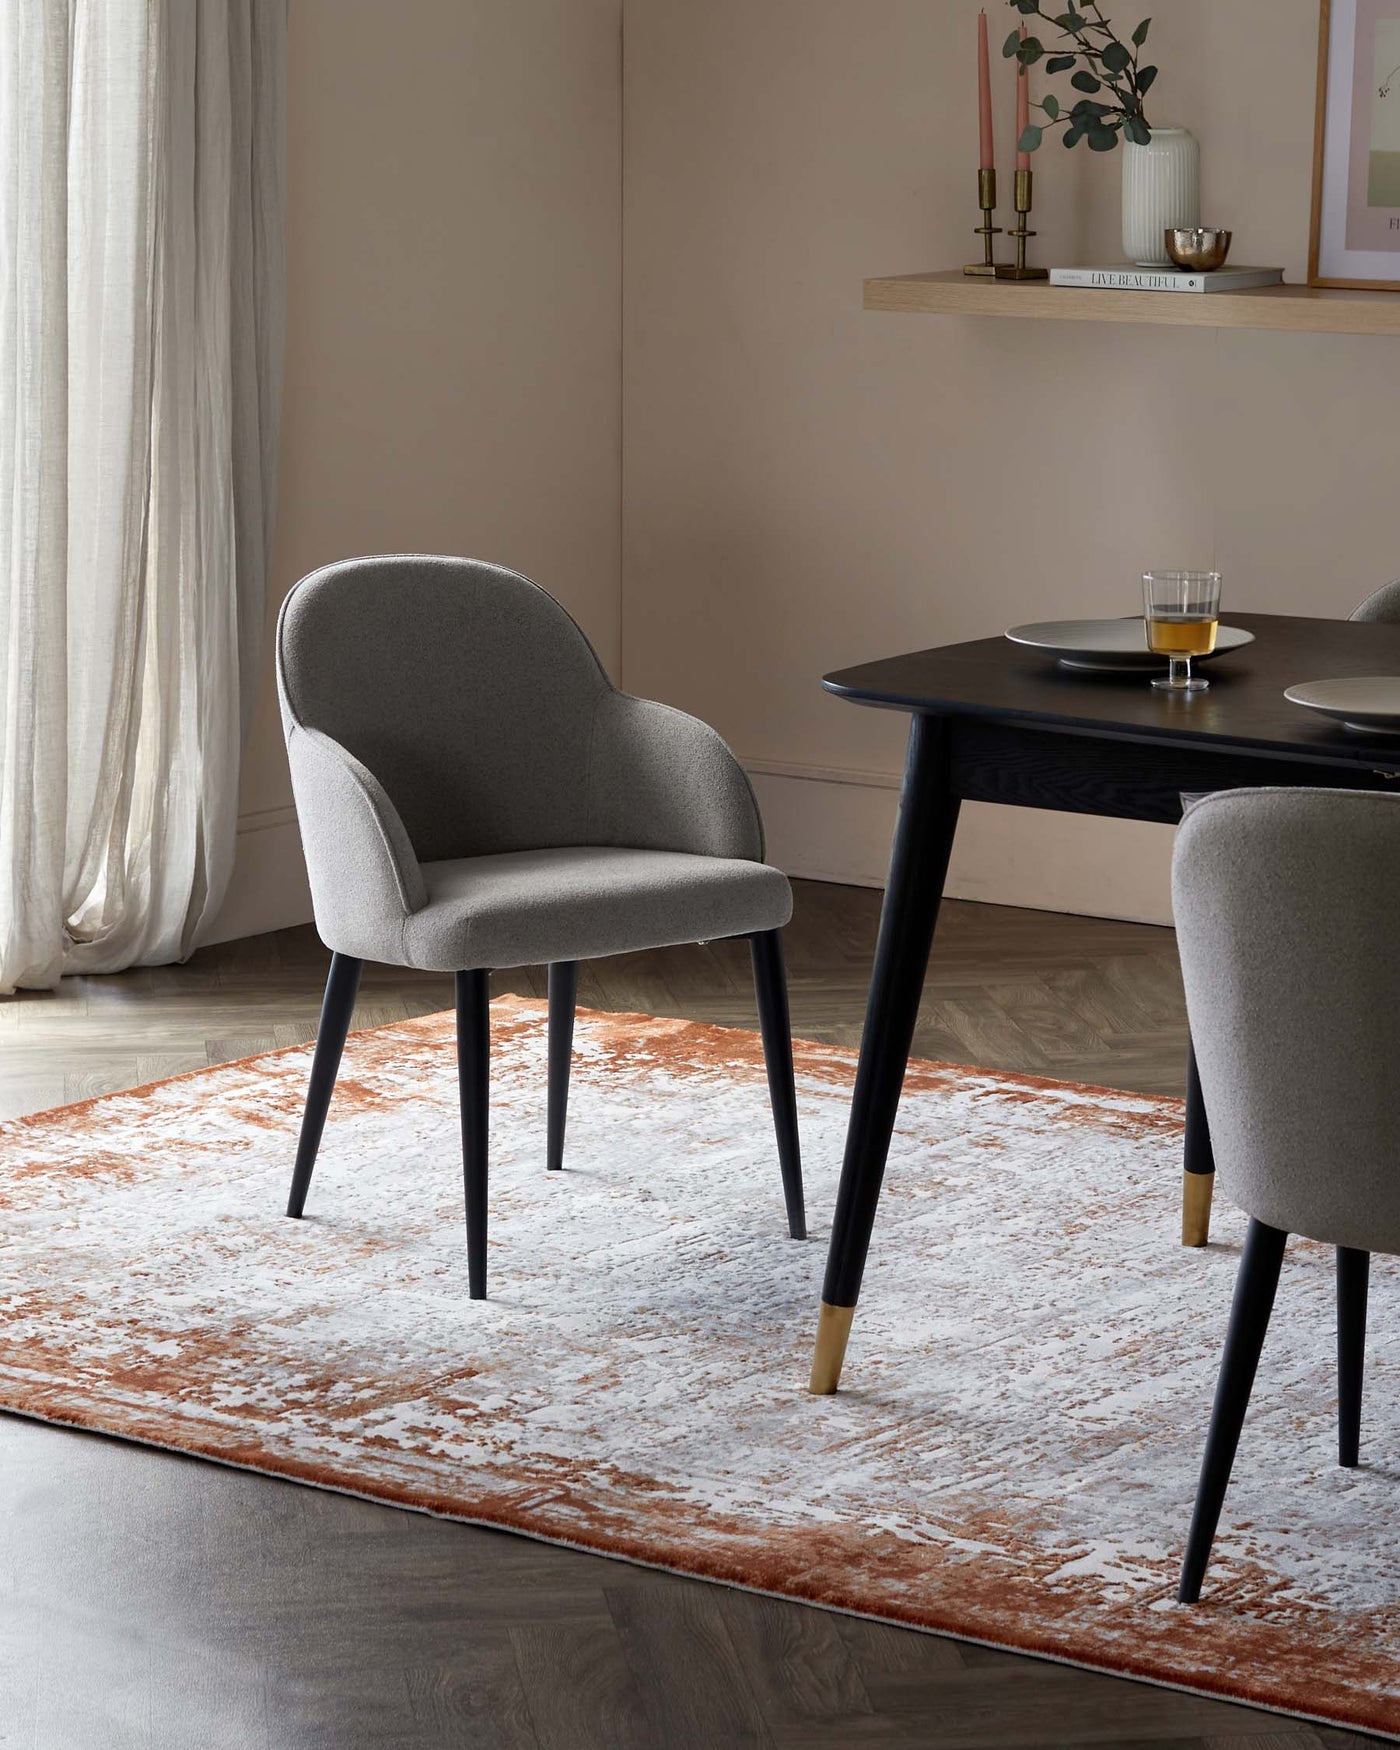 Elegant dining setting showcasing a modern, grey upholstered chair with smooth lines and rounded backrest, standing on sleek black legs accented with gold tips. A complementing dark wooden round dining table with similar leg design is partly visible. The setup is completed by a textured off-white and rust-coloured area rug beneath.